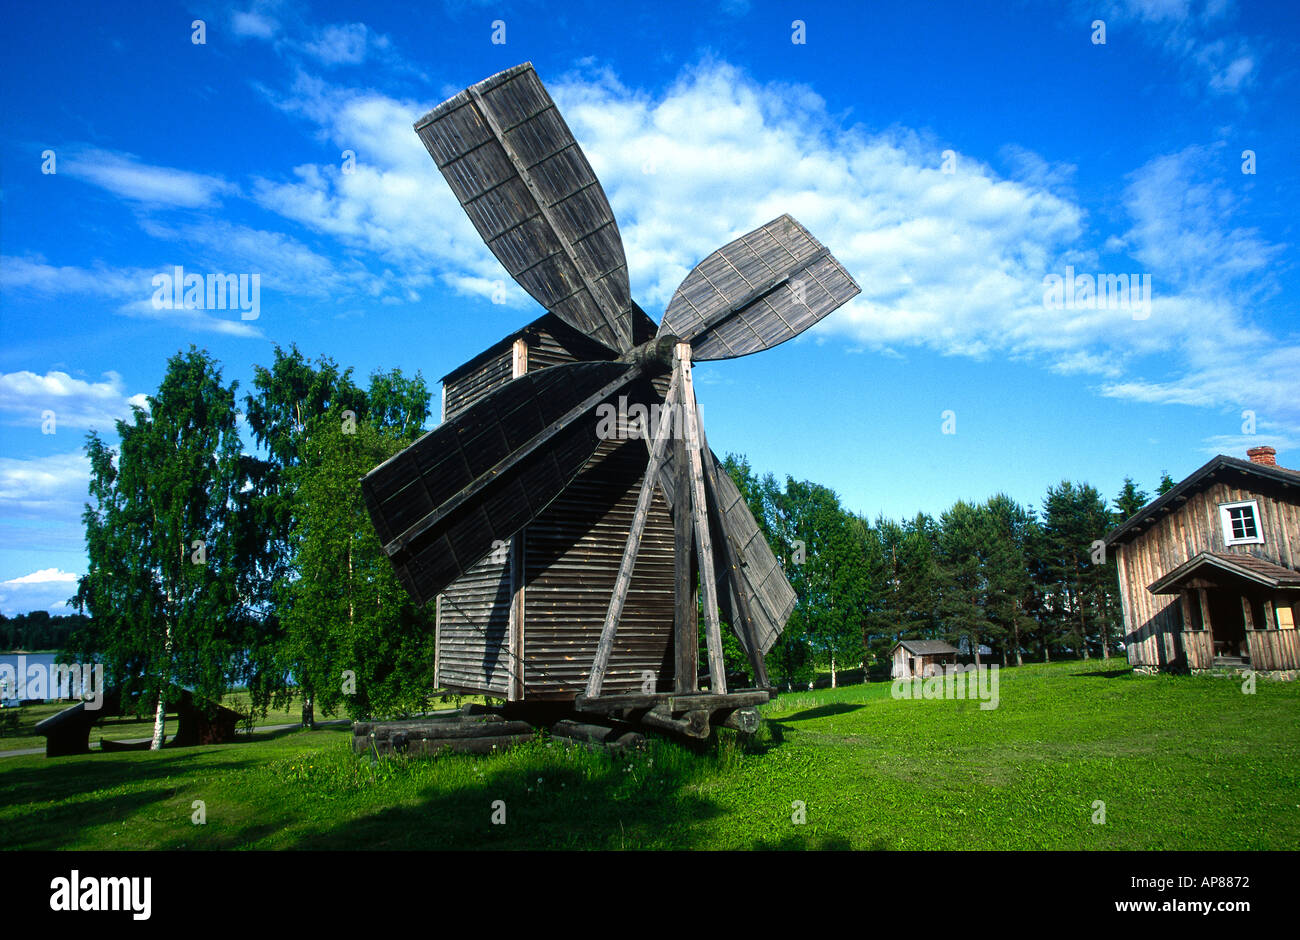 Traditional windmill in open air museum, Rantasalmi, Finland Stock Photo